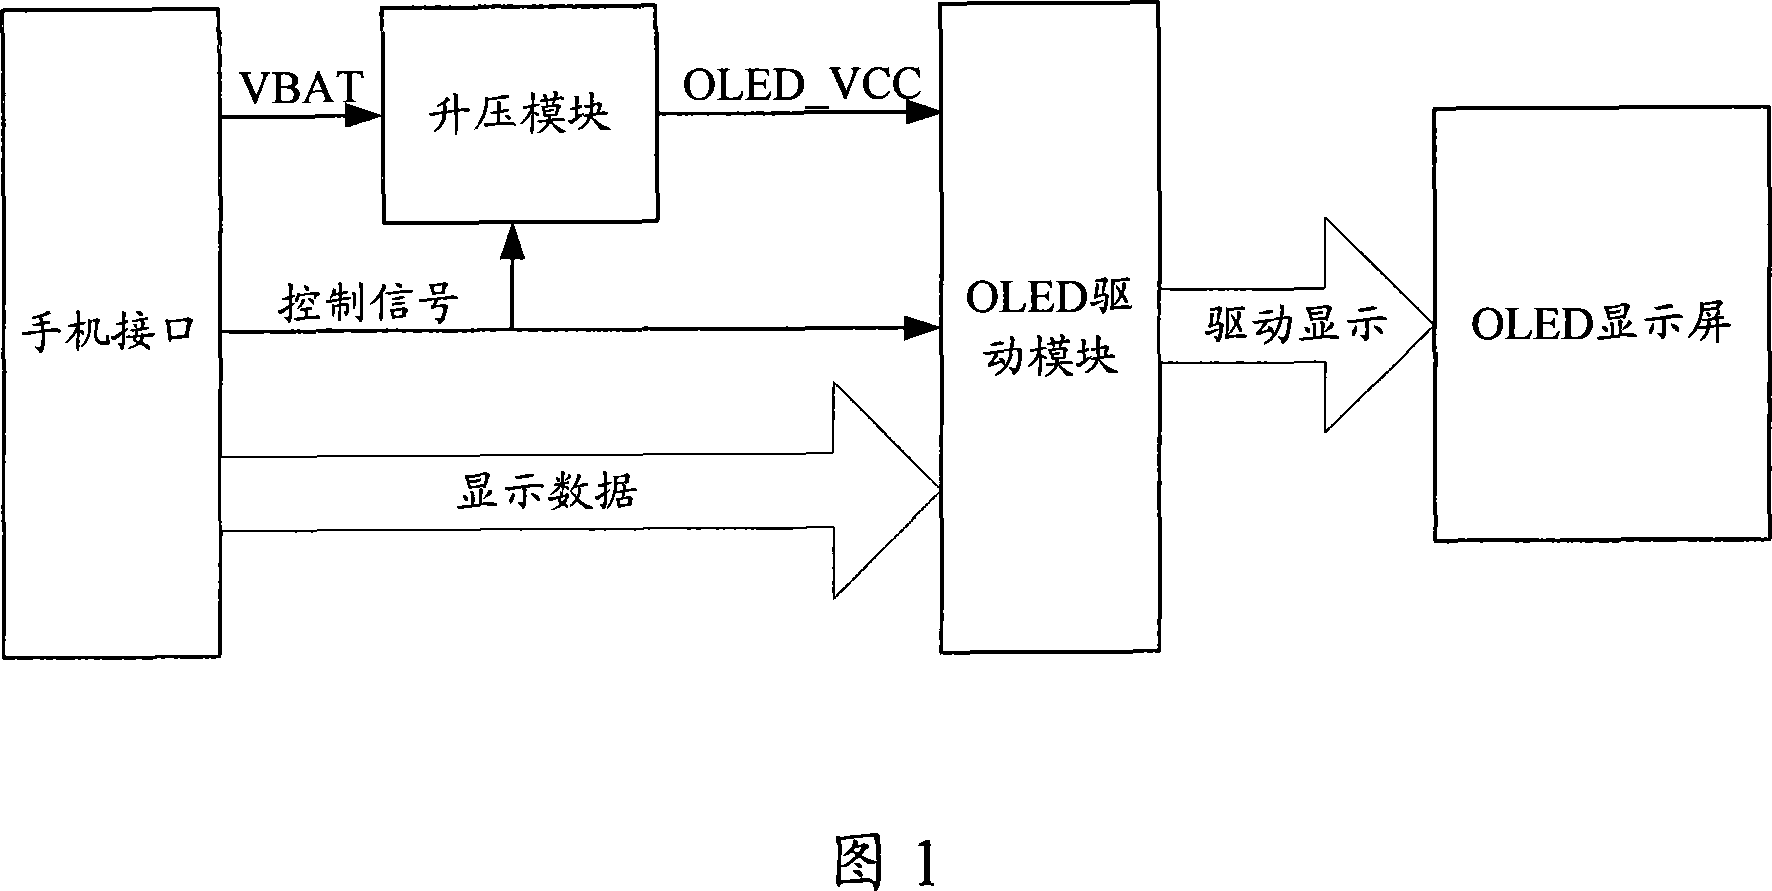 Organic luminescence display unit of the mobile phone and method for reducing the power consumption of the mobile phone